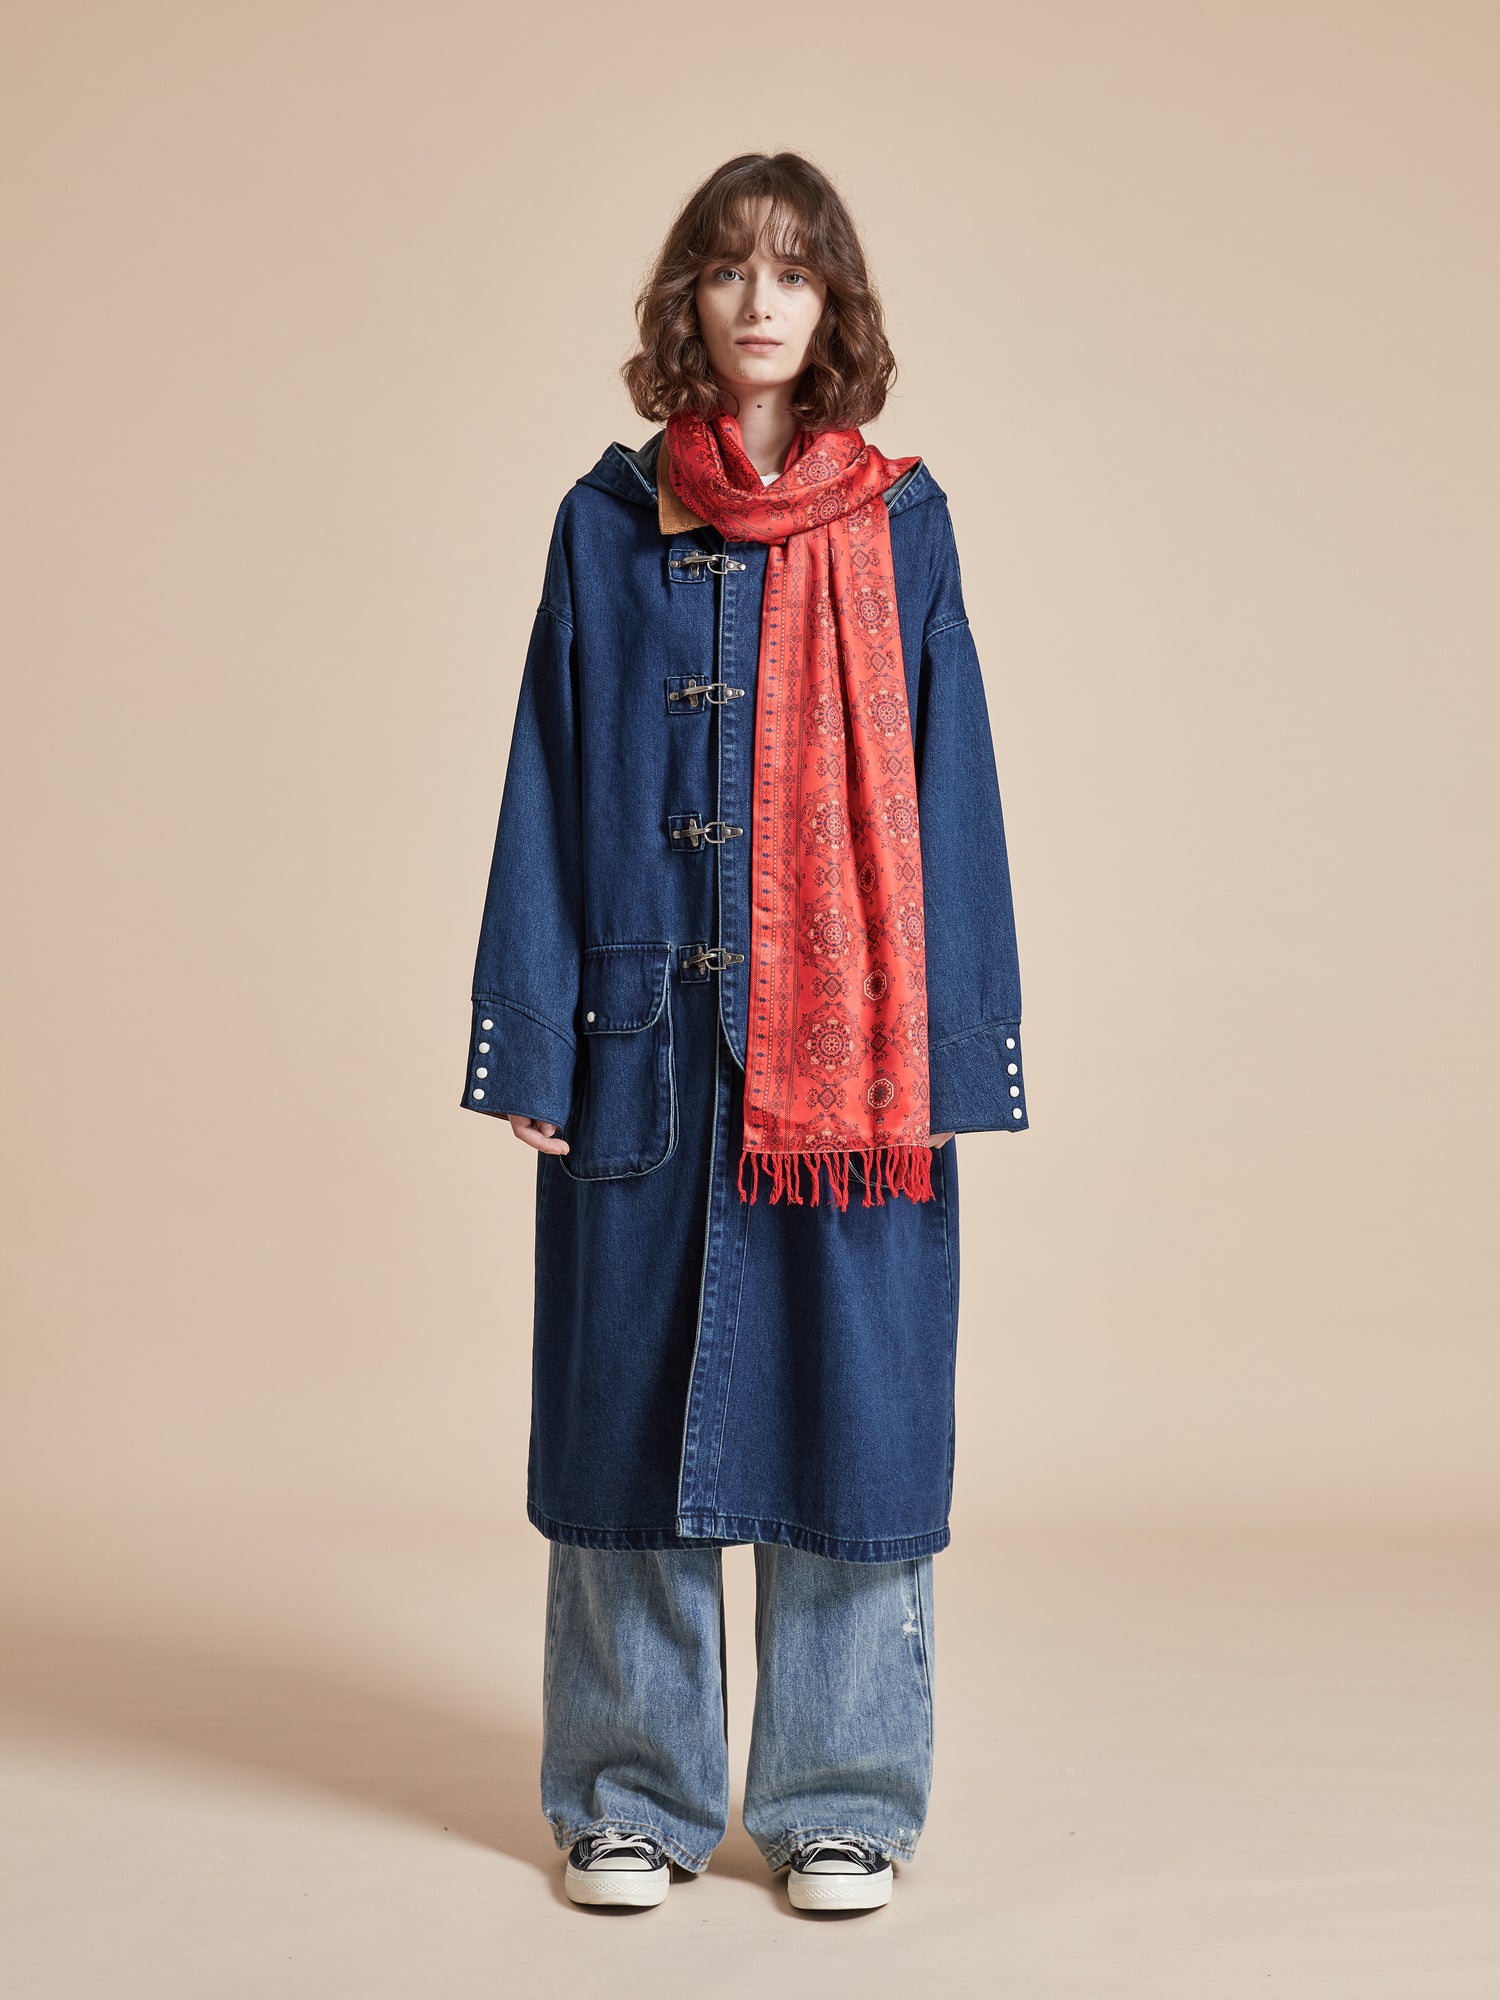 A woman wearing a Sargasso Denim Buckle Coat and Found scarf.